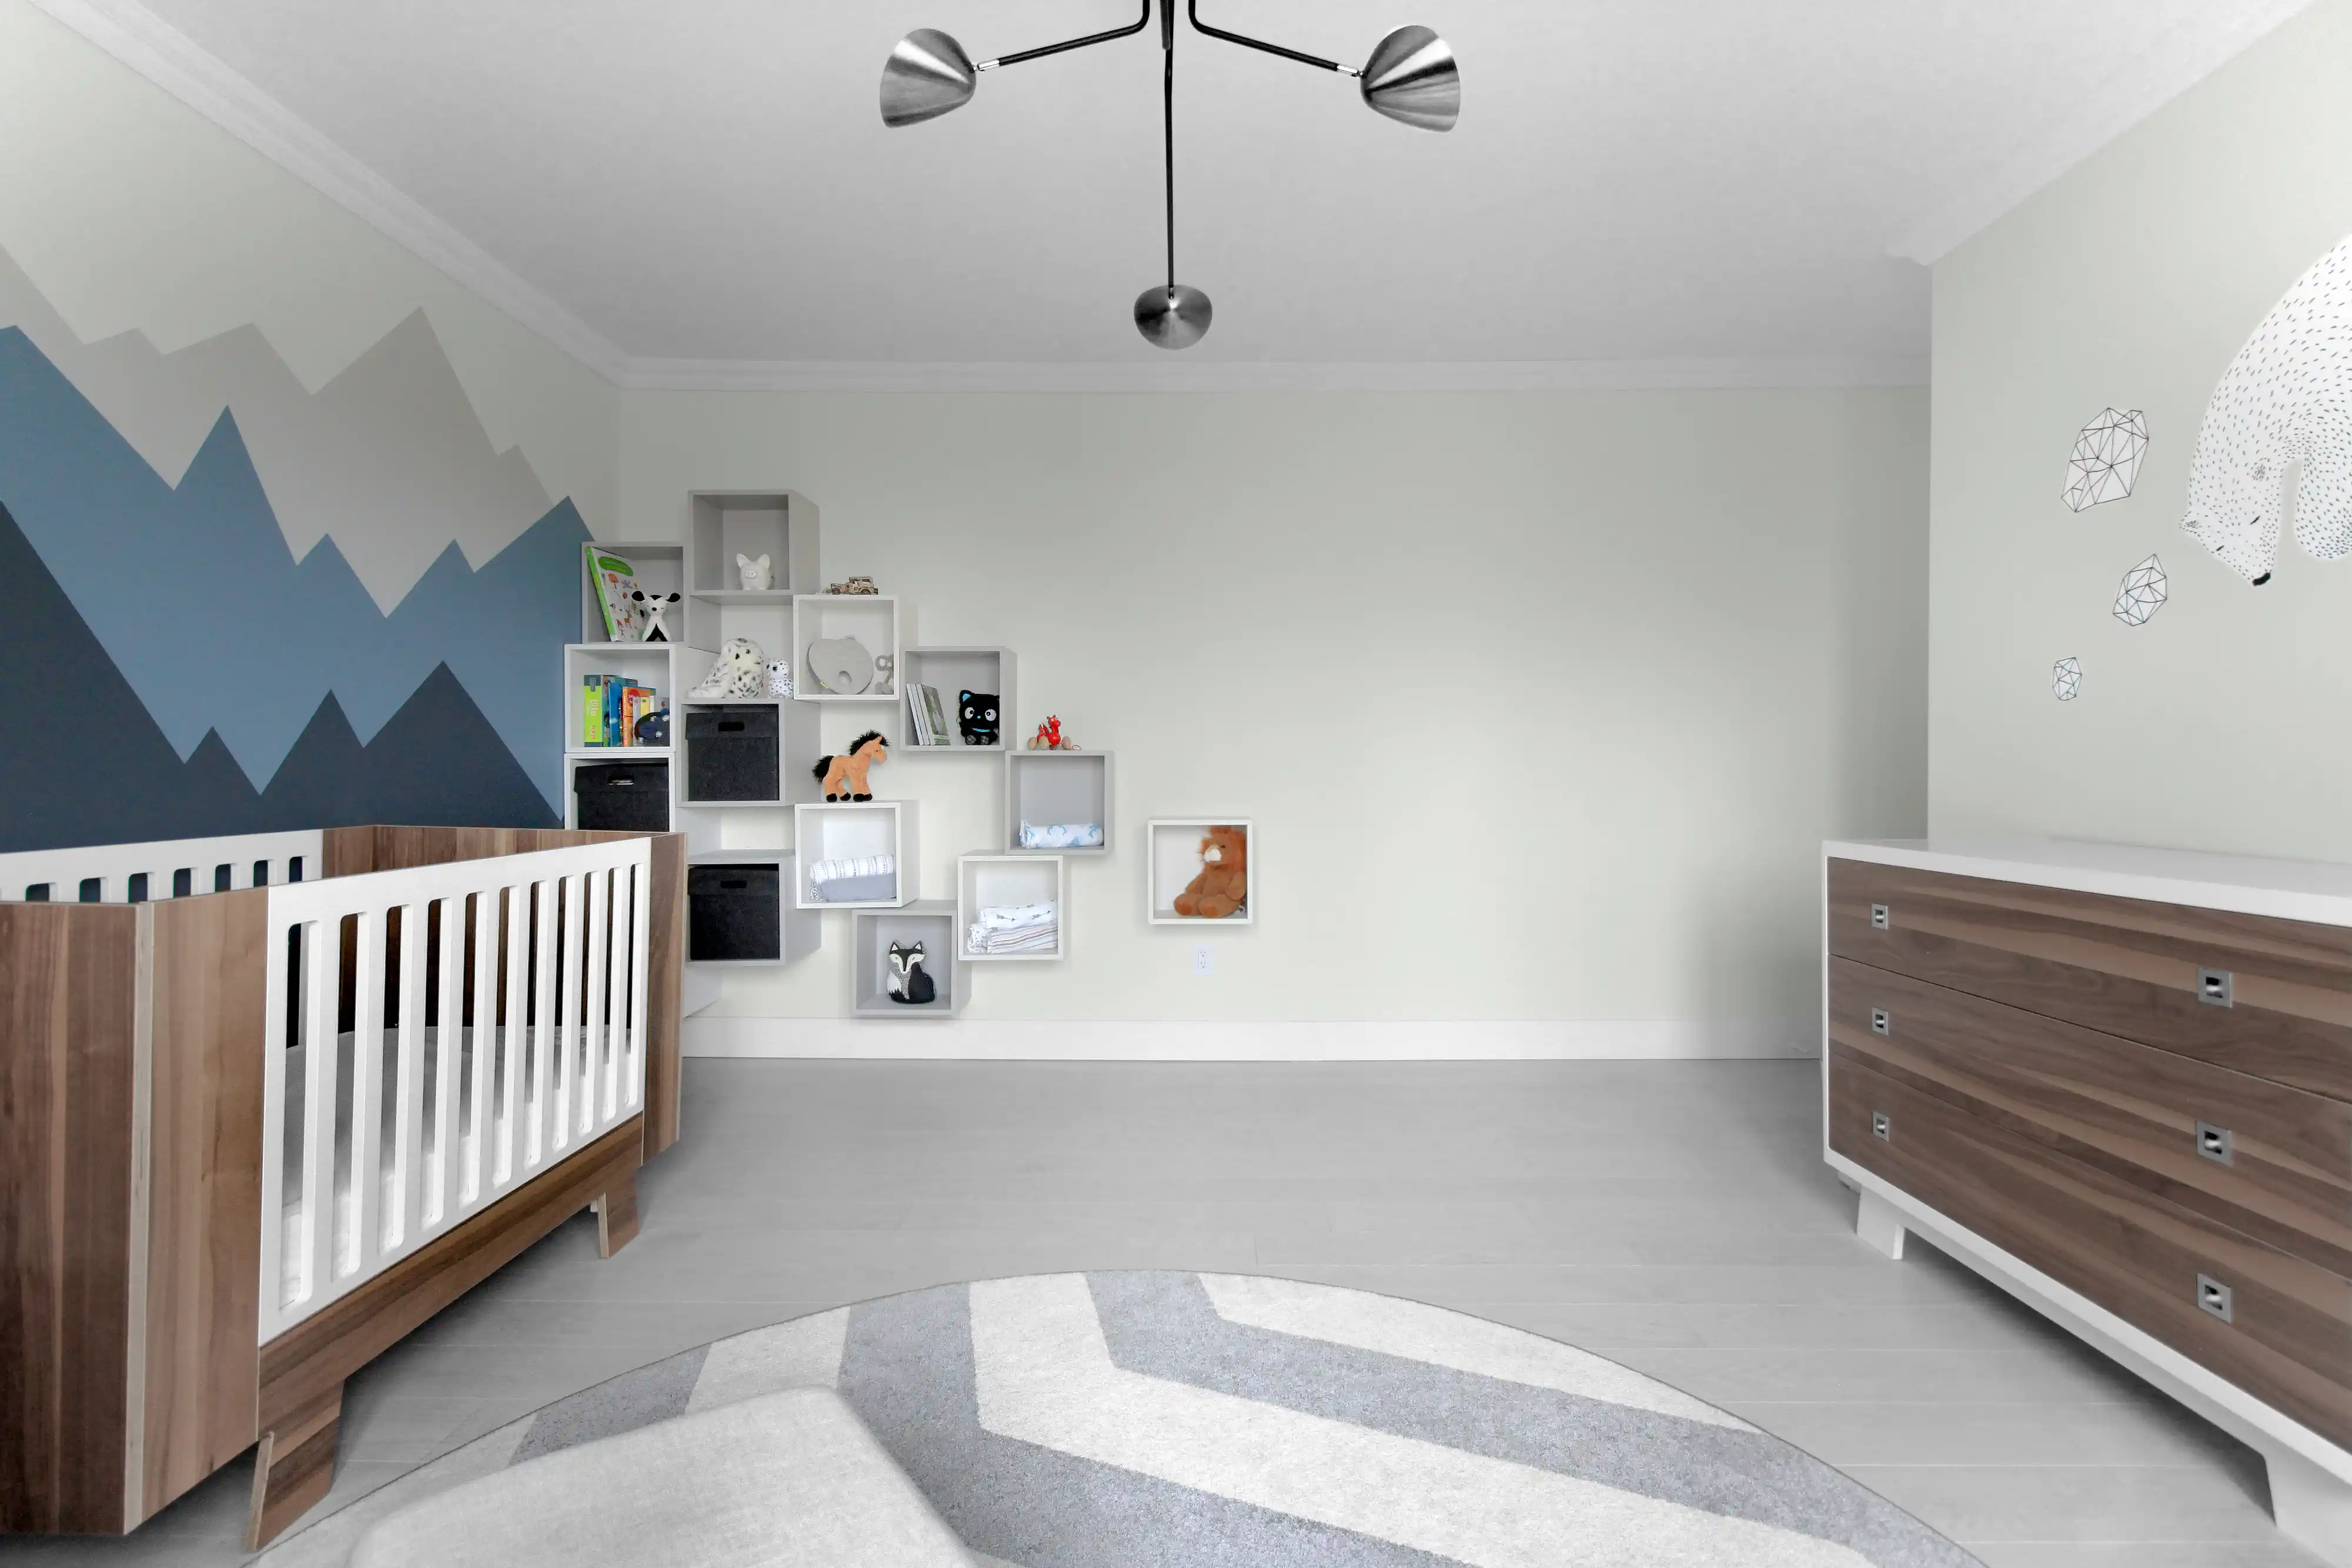 Modern nursery room with a blue and gray mountain mural, a white crib, and a wooden dresser, interior by Sarah Brown Design